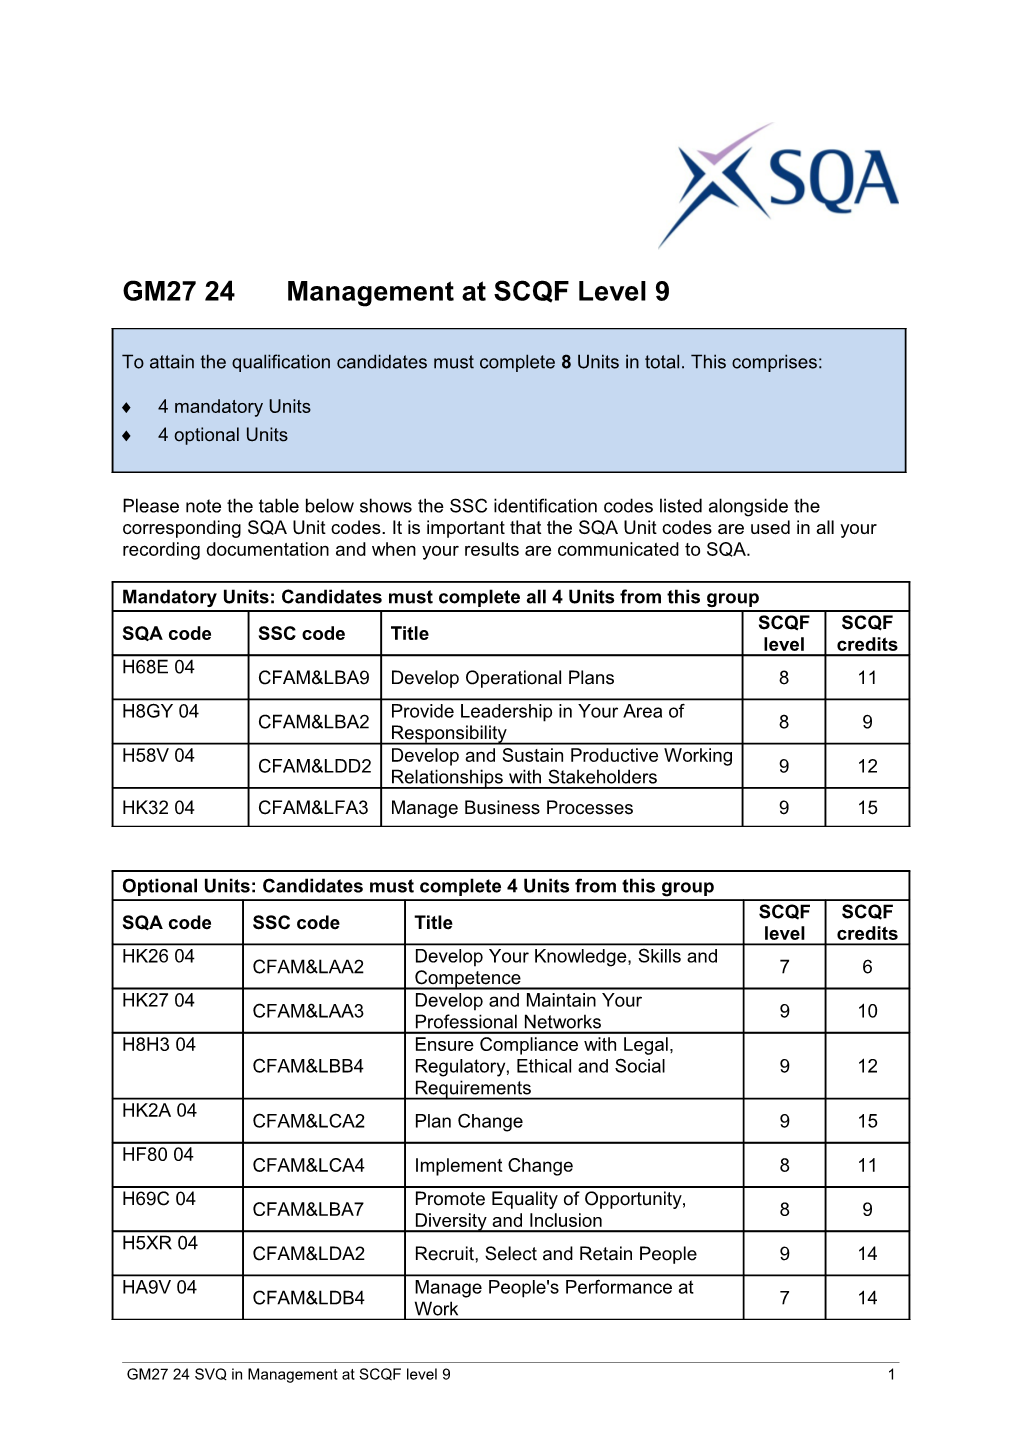 GM27 24 SVQ in Management at SCQF Level 91